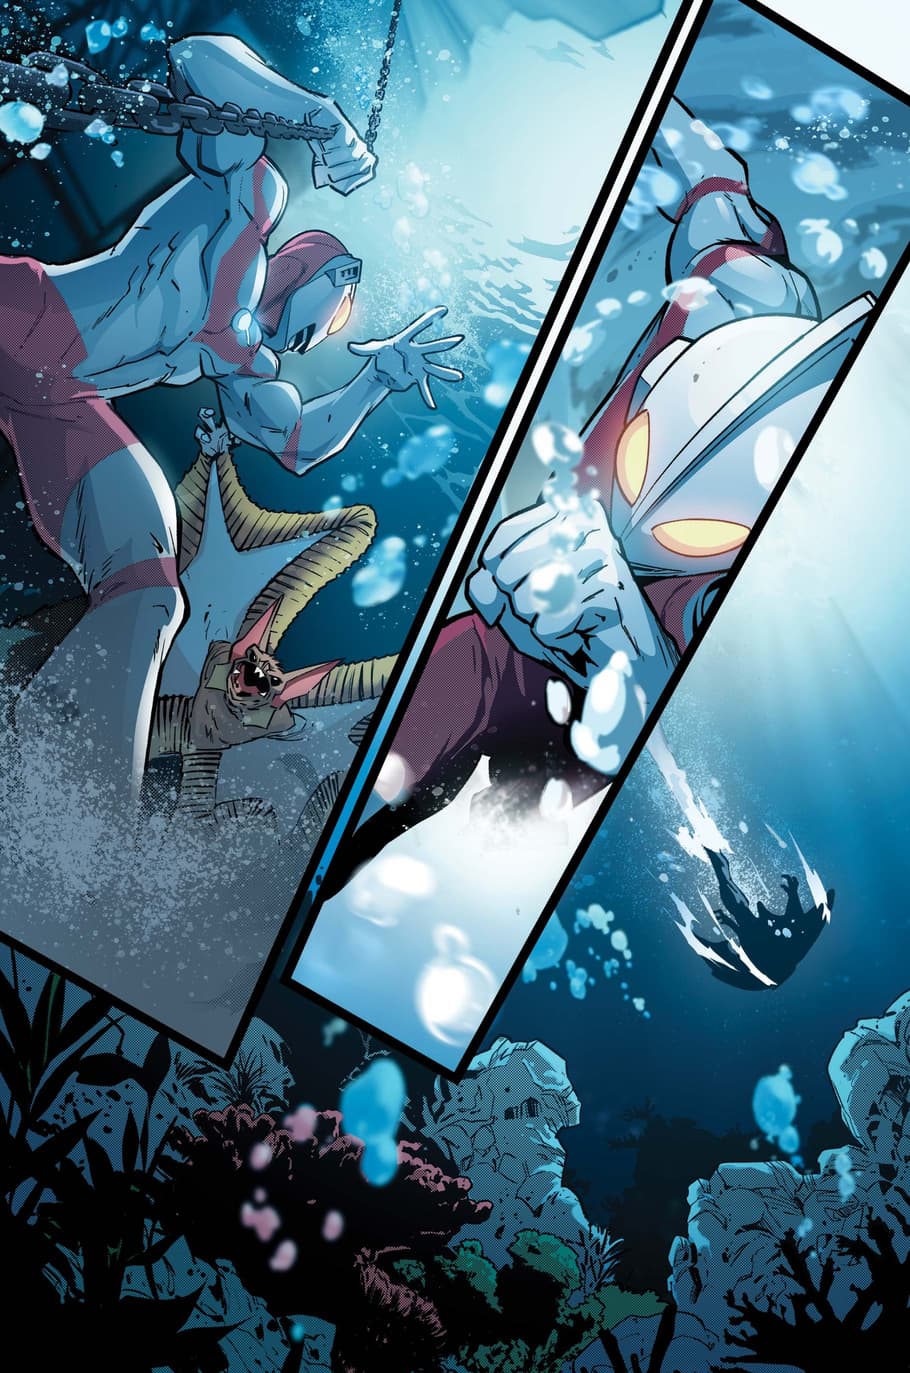 Shin Hayata  fights a monster of the deep in THE TRIALS OF ULTRAMAN (2021) #1.